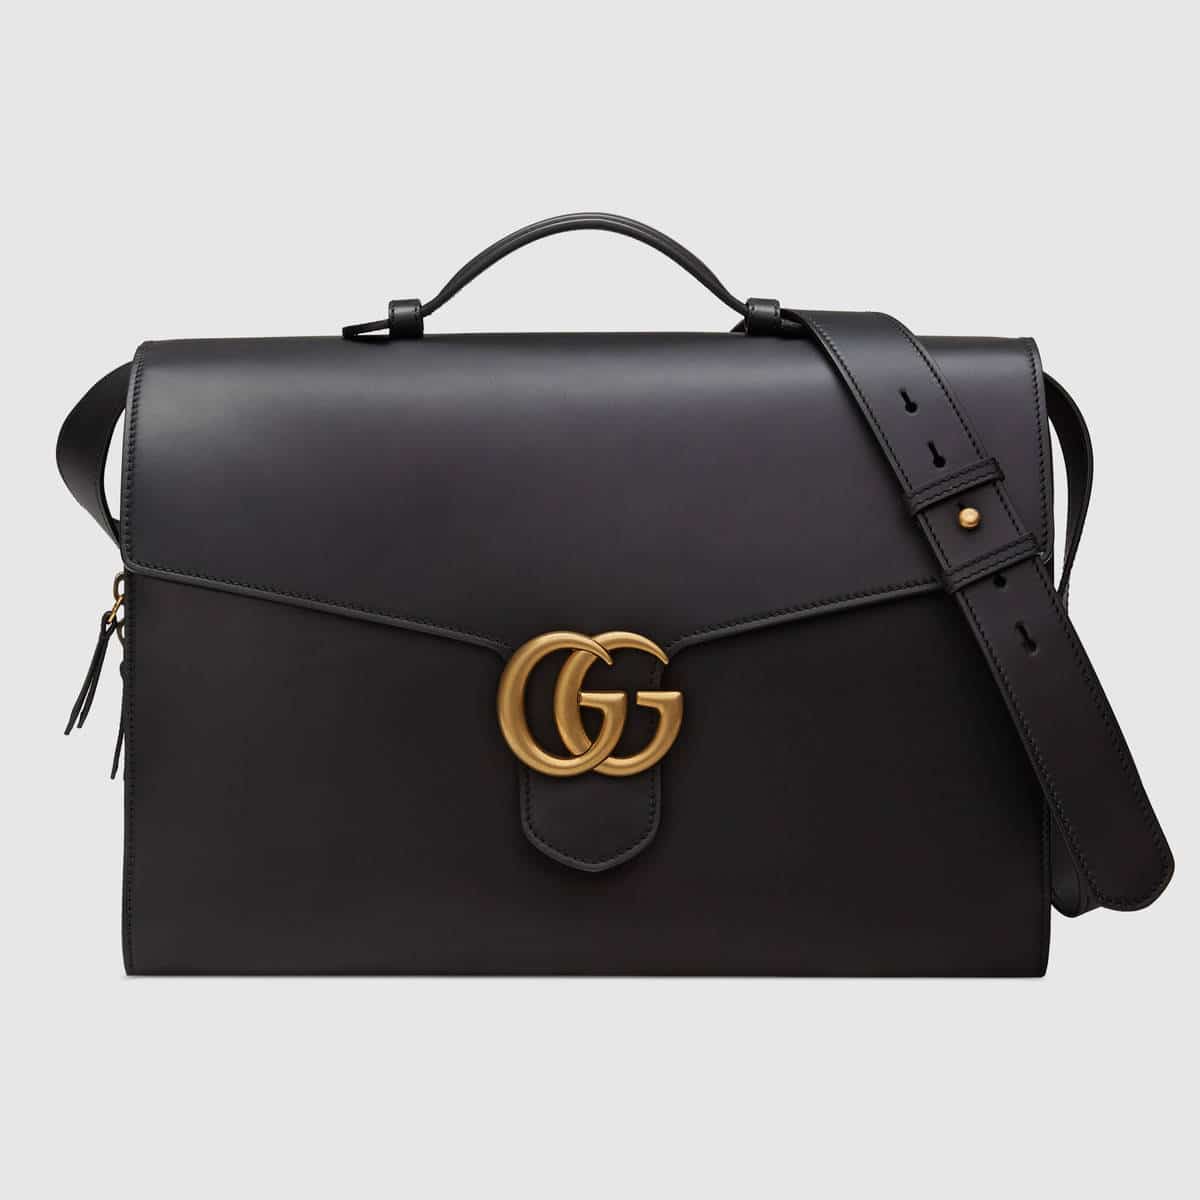 Gucci Gg Marmont Bag Sizes | Paul Smith